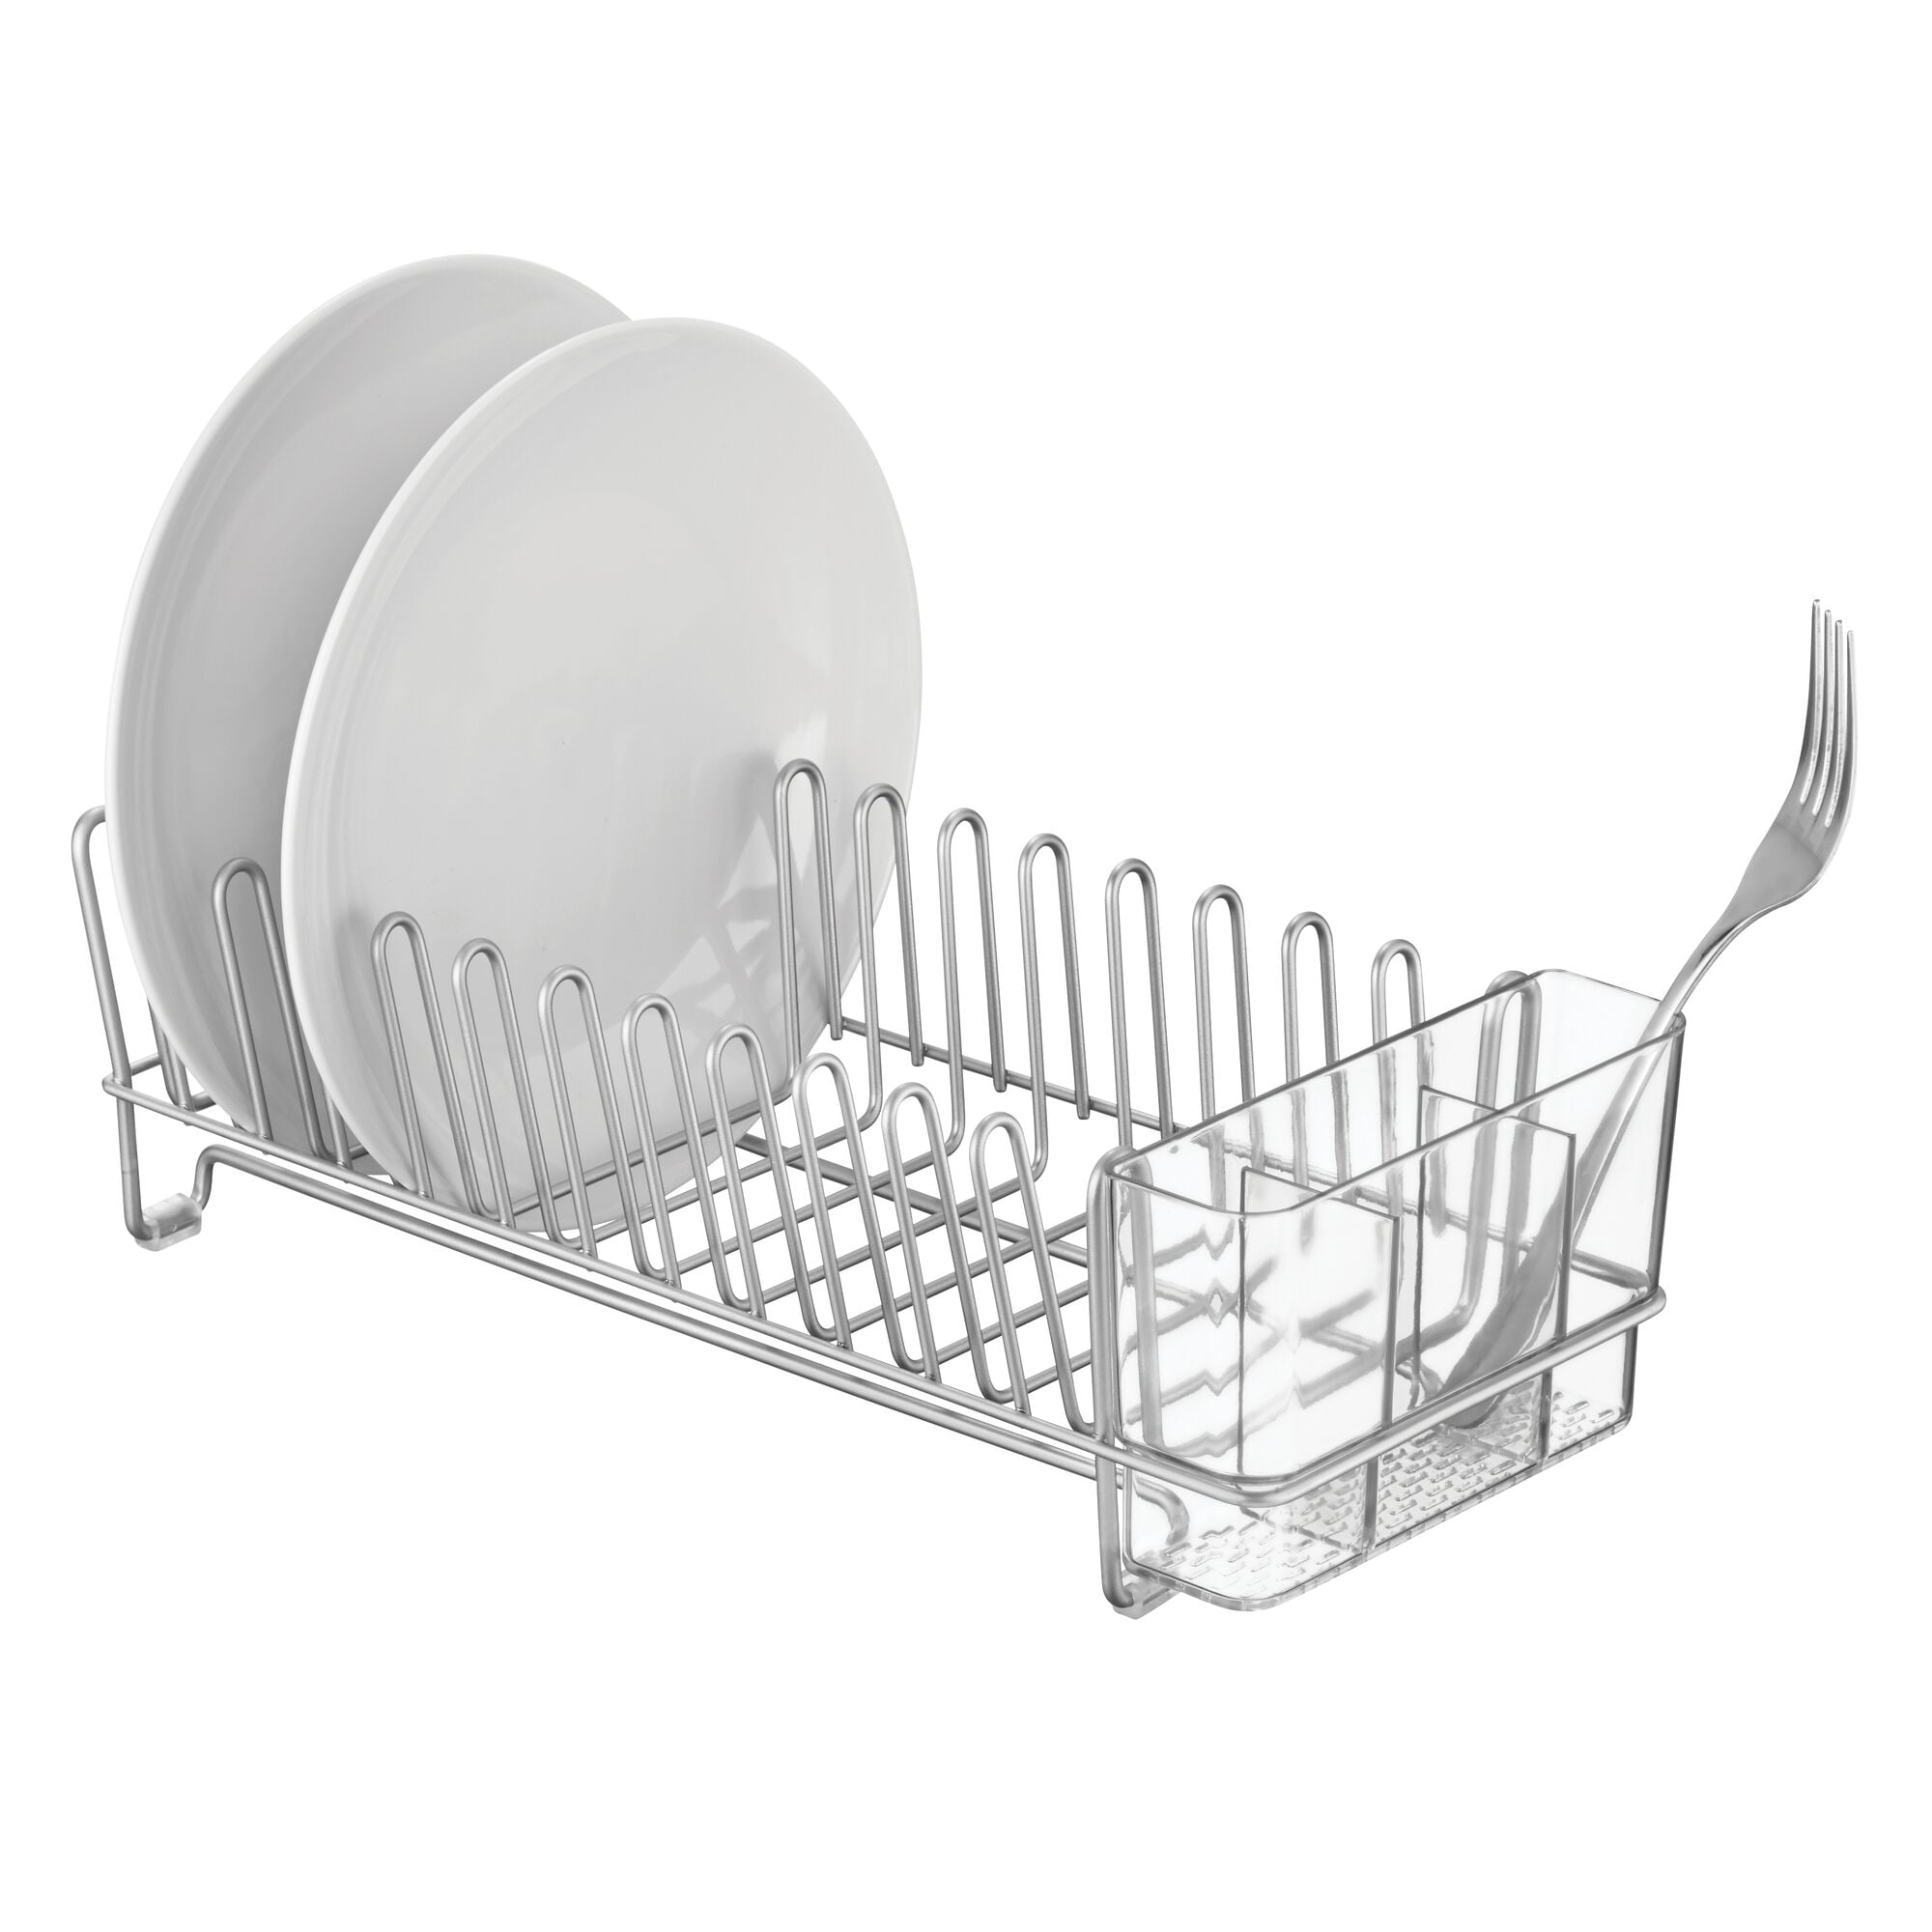 Navaris Dish Drainer Rack - Plate, Silverware, Pots and Pans Drying Rack for Kitchen with Beechwood Handles - Modern Retro Design Drip Tray - Black